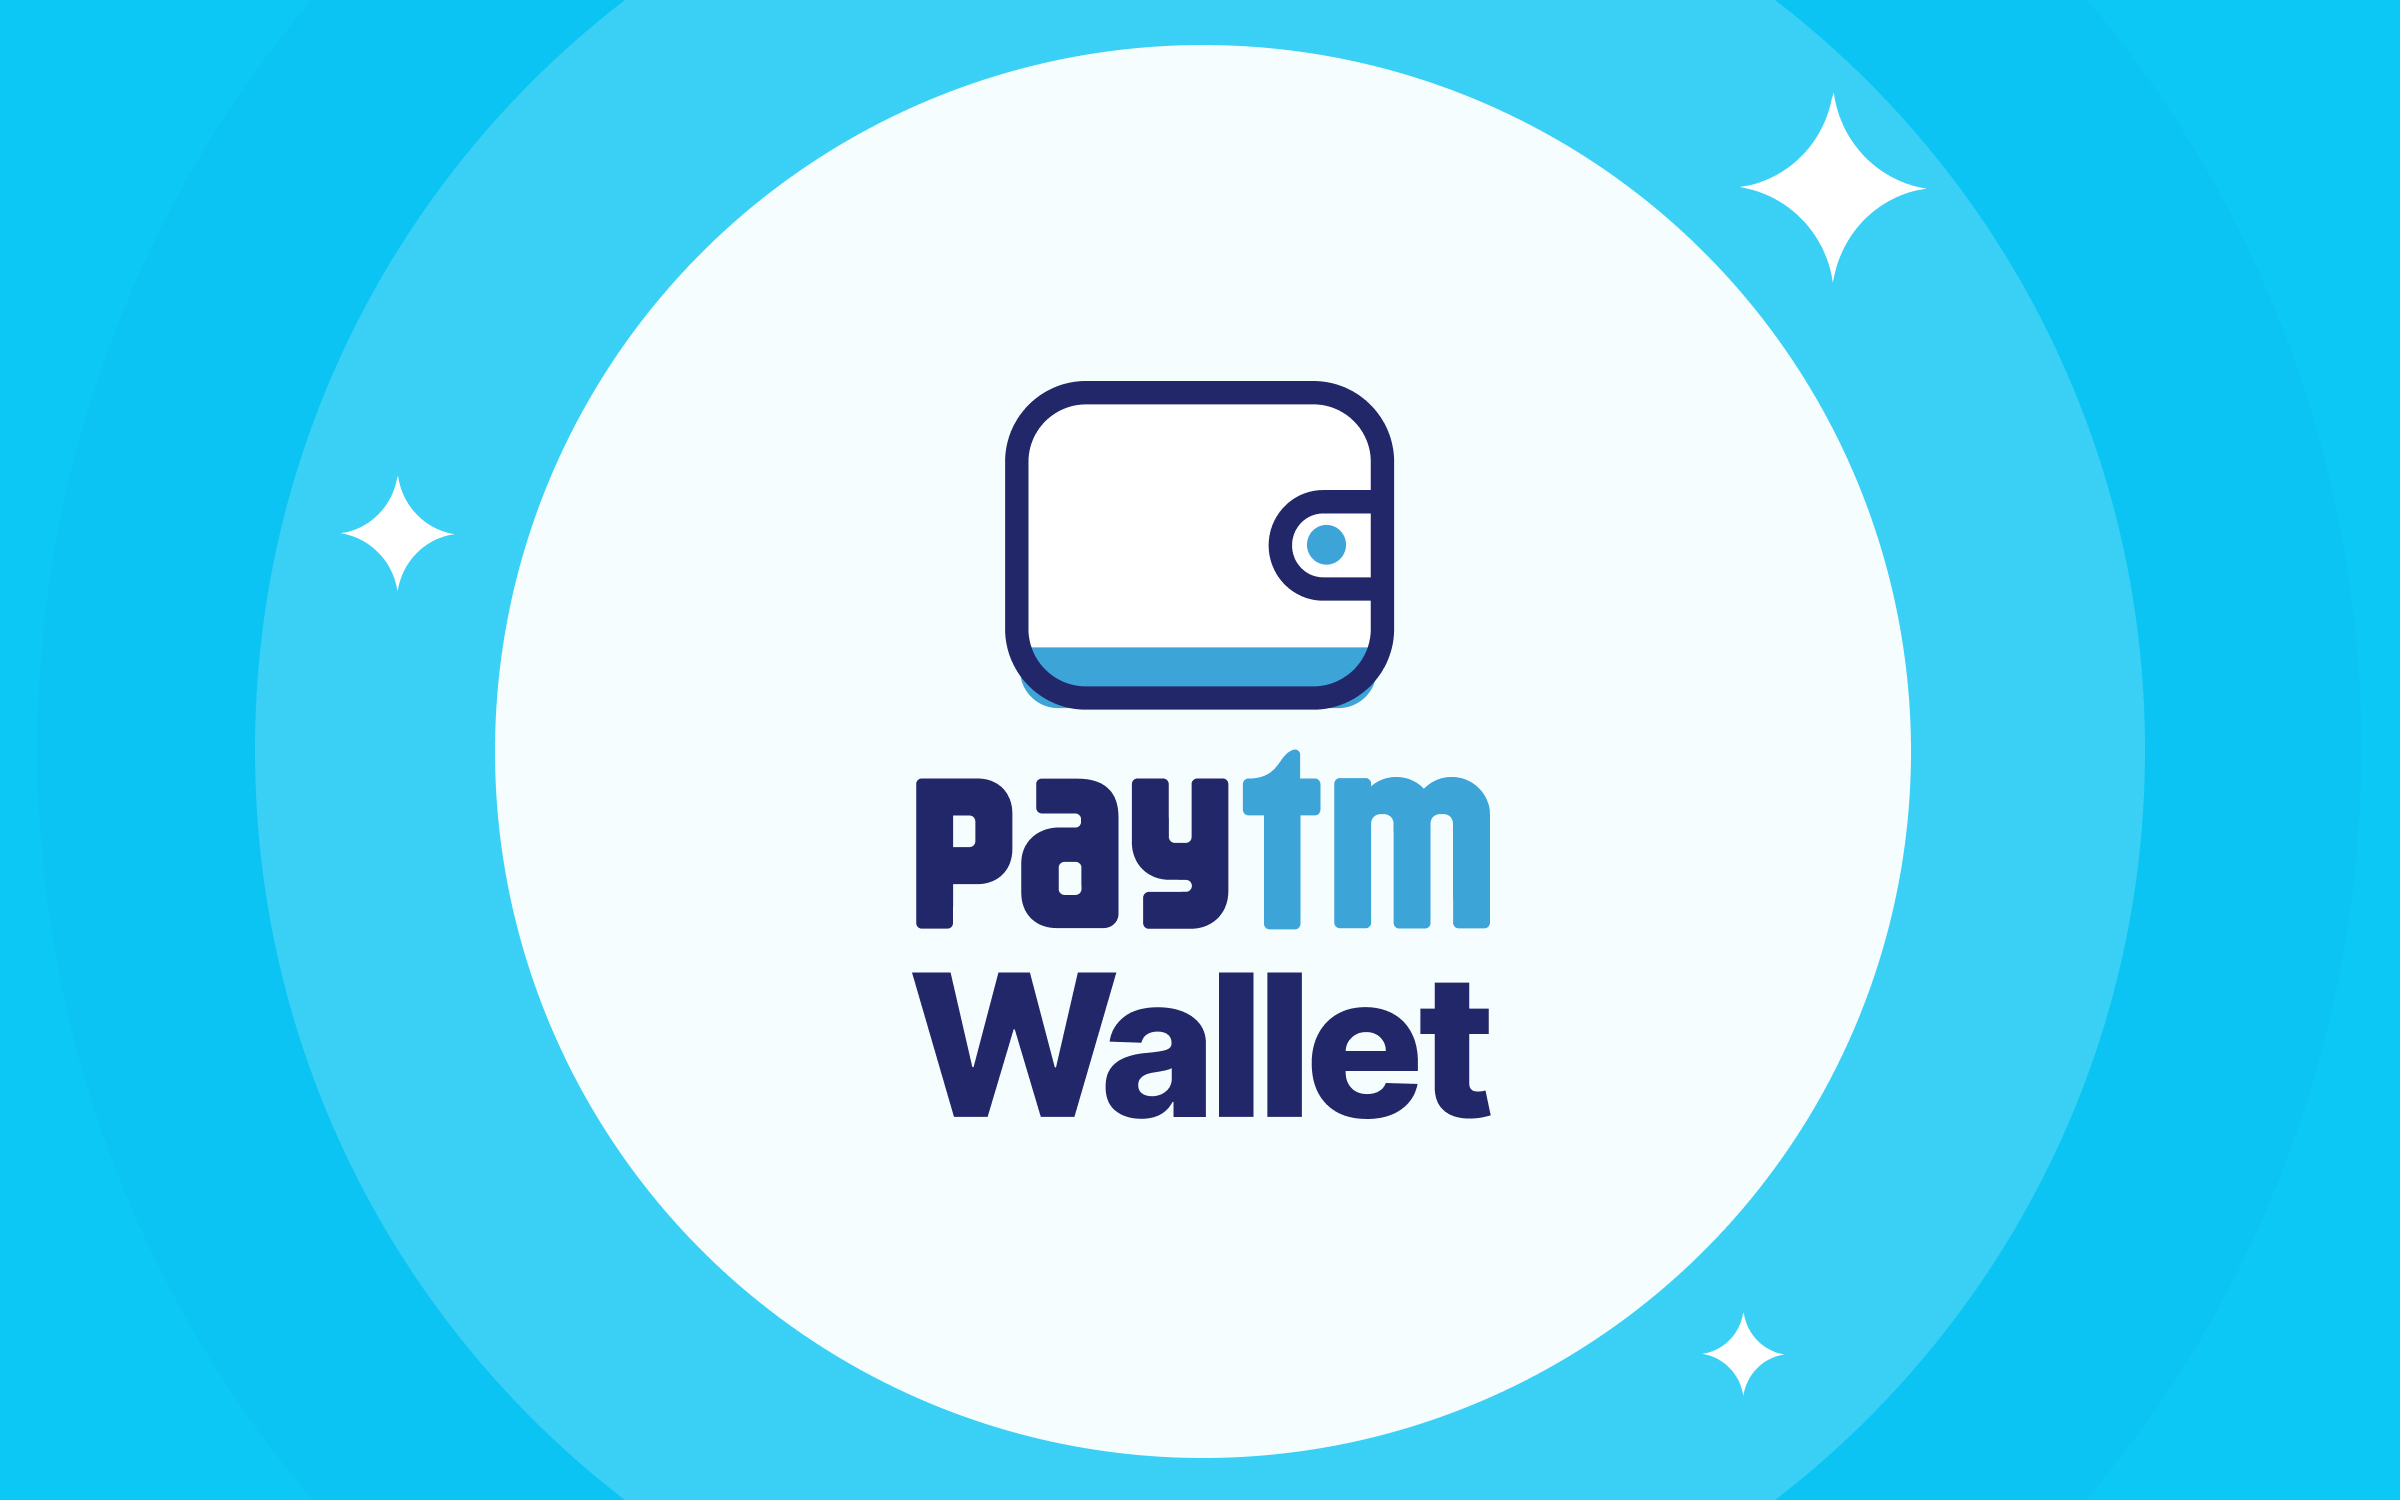 Paytm Payments Bank on X: "We are excited to announce that Paytm Wallet  will soon be universally acceptable on all UPI QRs and online merchants. We  welcome @NPCI_NPCI interoperability guidelines that allow